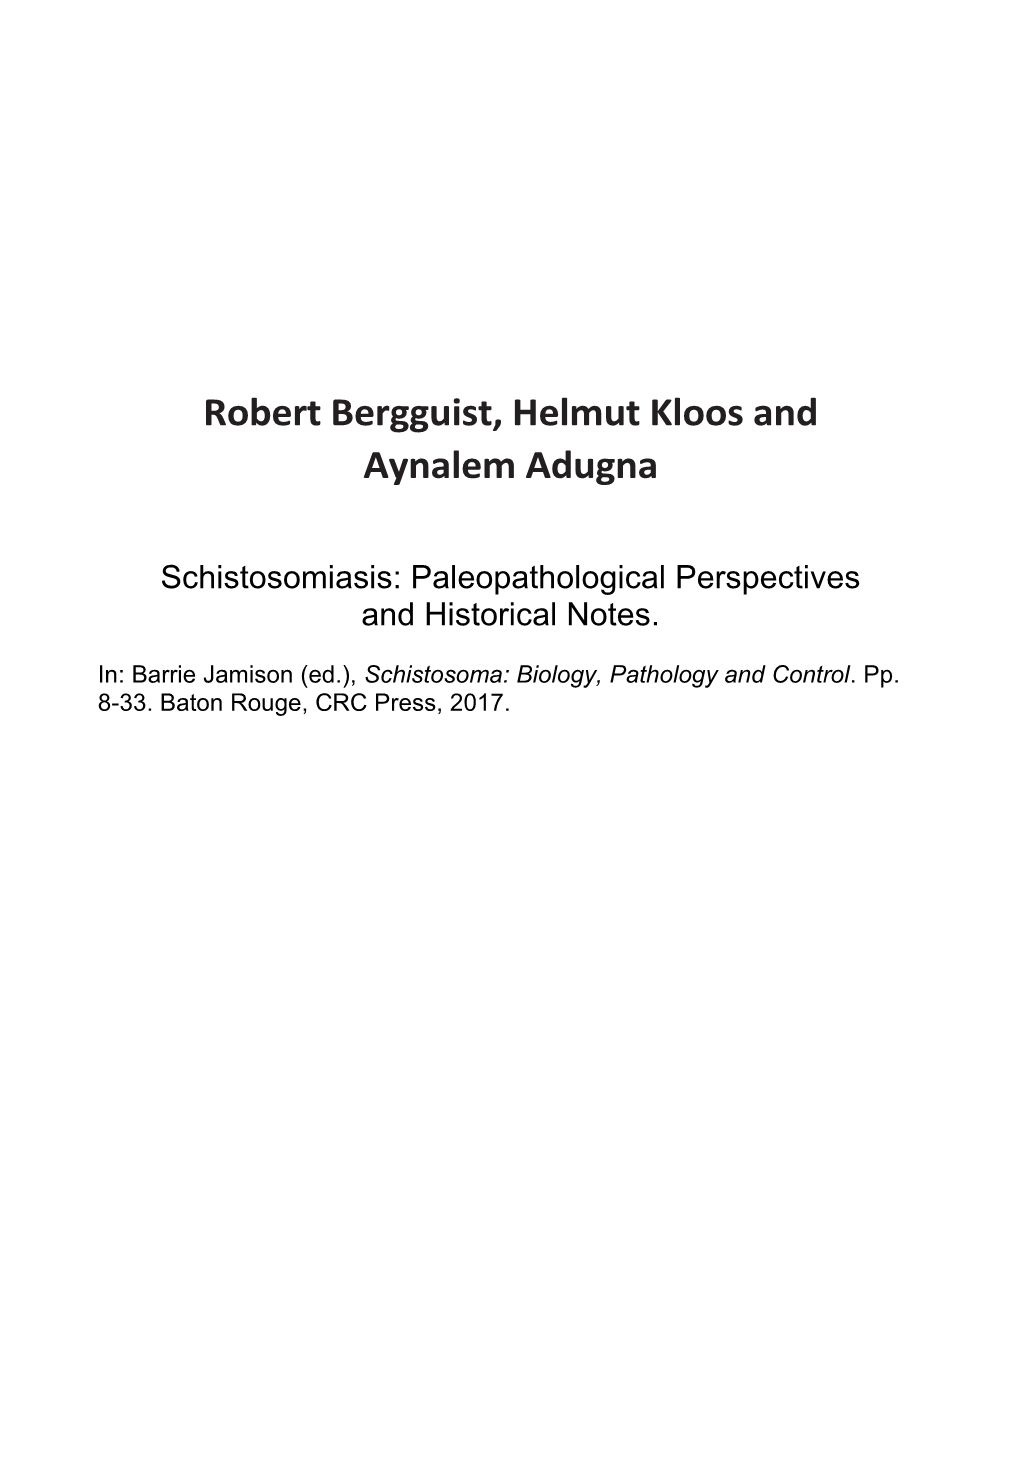 Schistosomiasis: Paleopathological Perspectives and Historical Notes